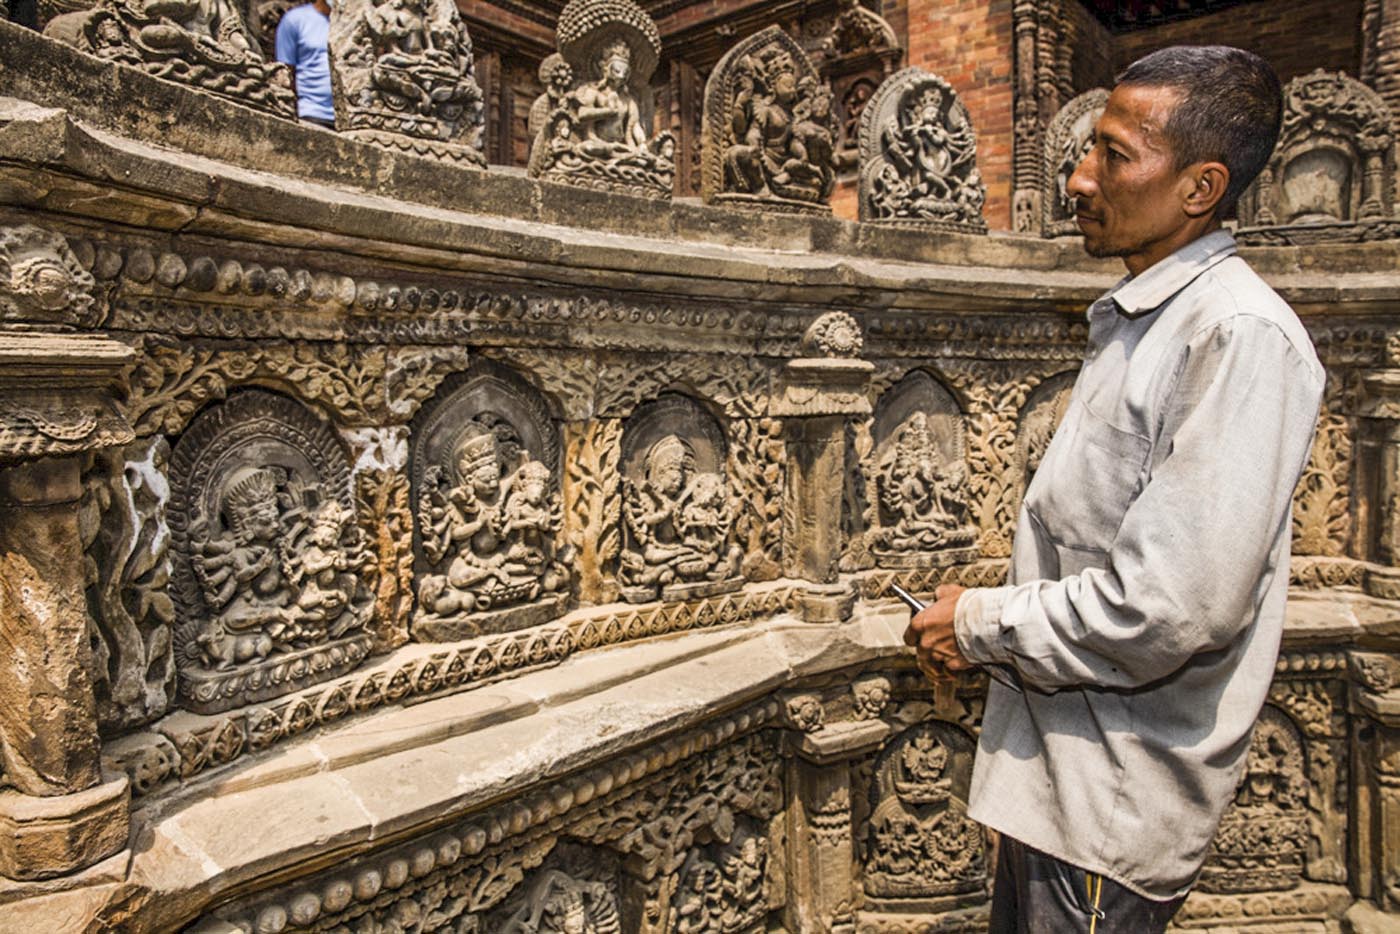 The Restoration of Patan Durbar Square - Hinduism Today